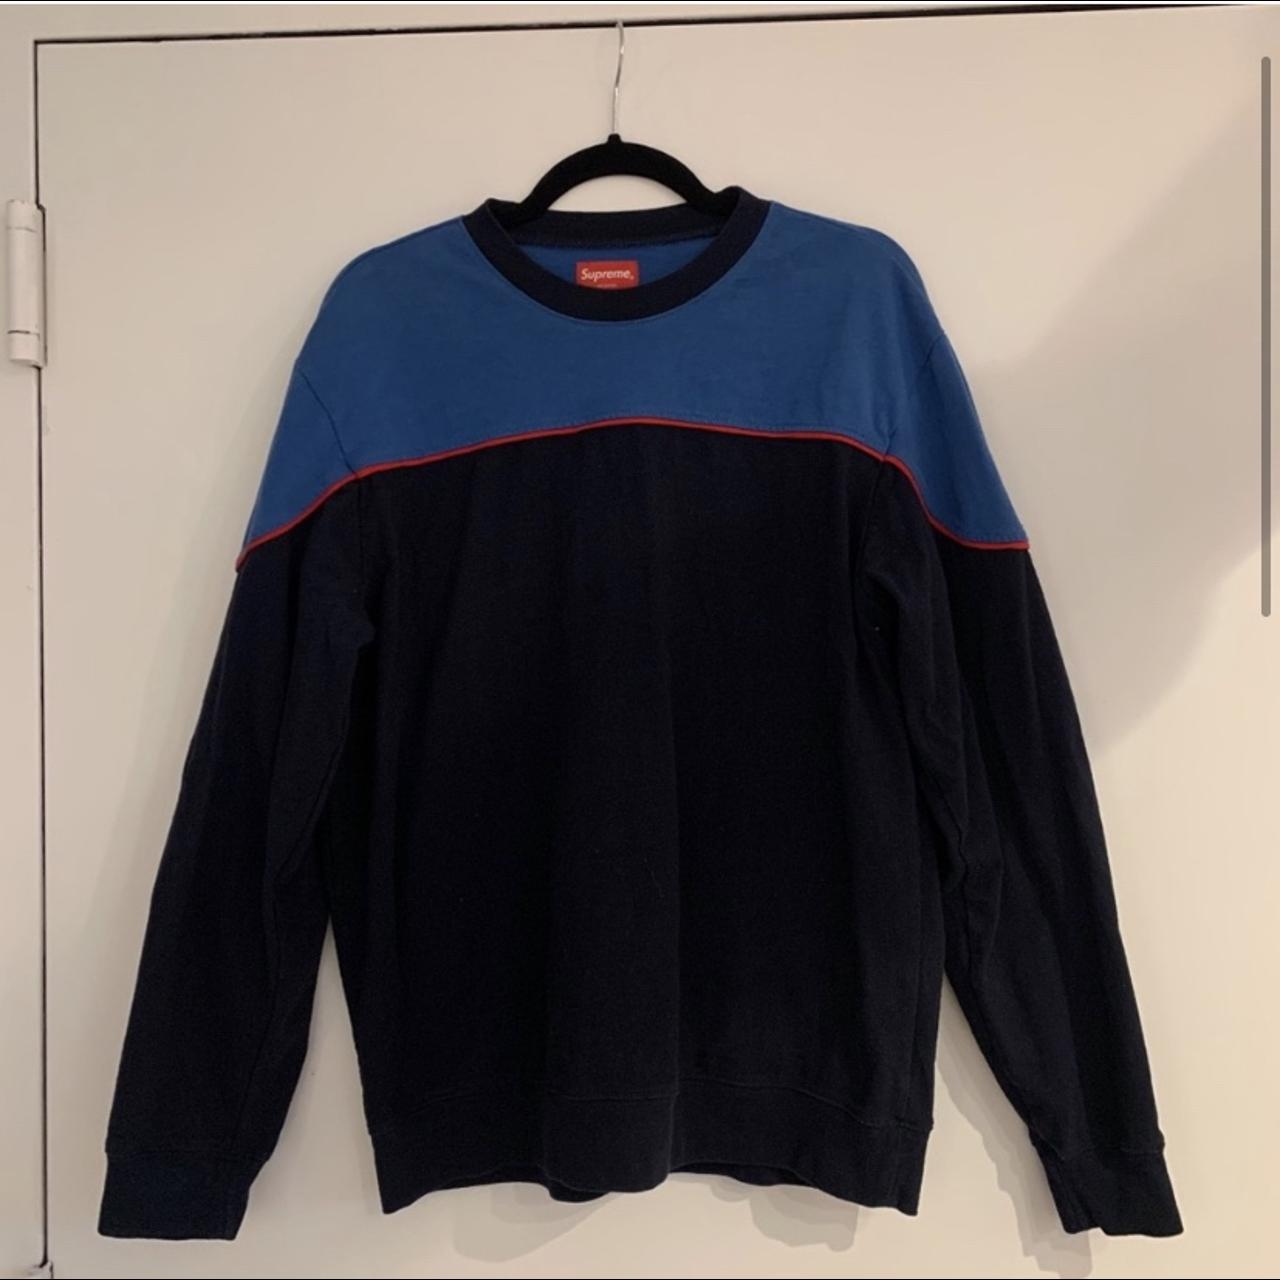 SUPREME Yoke Piping L/S Top From the May 2018... - Depop